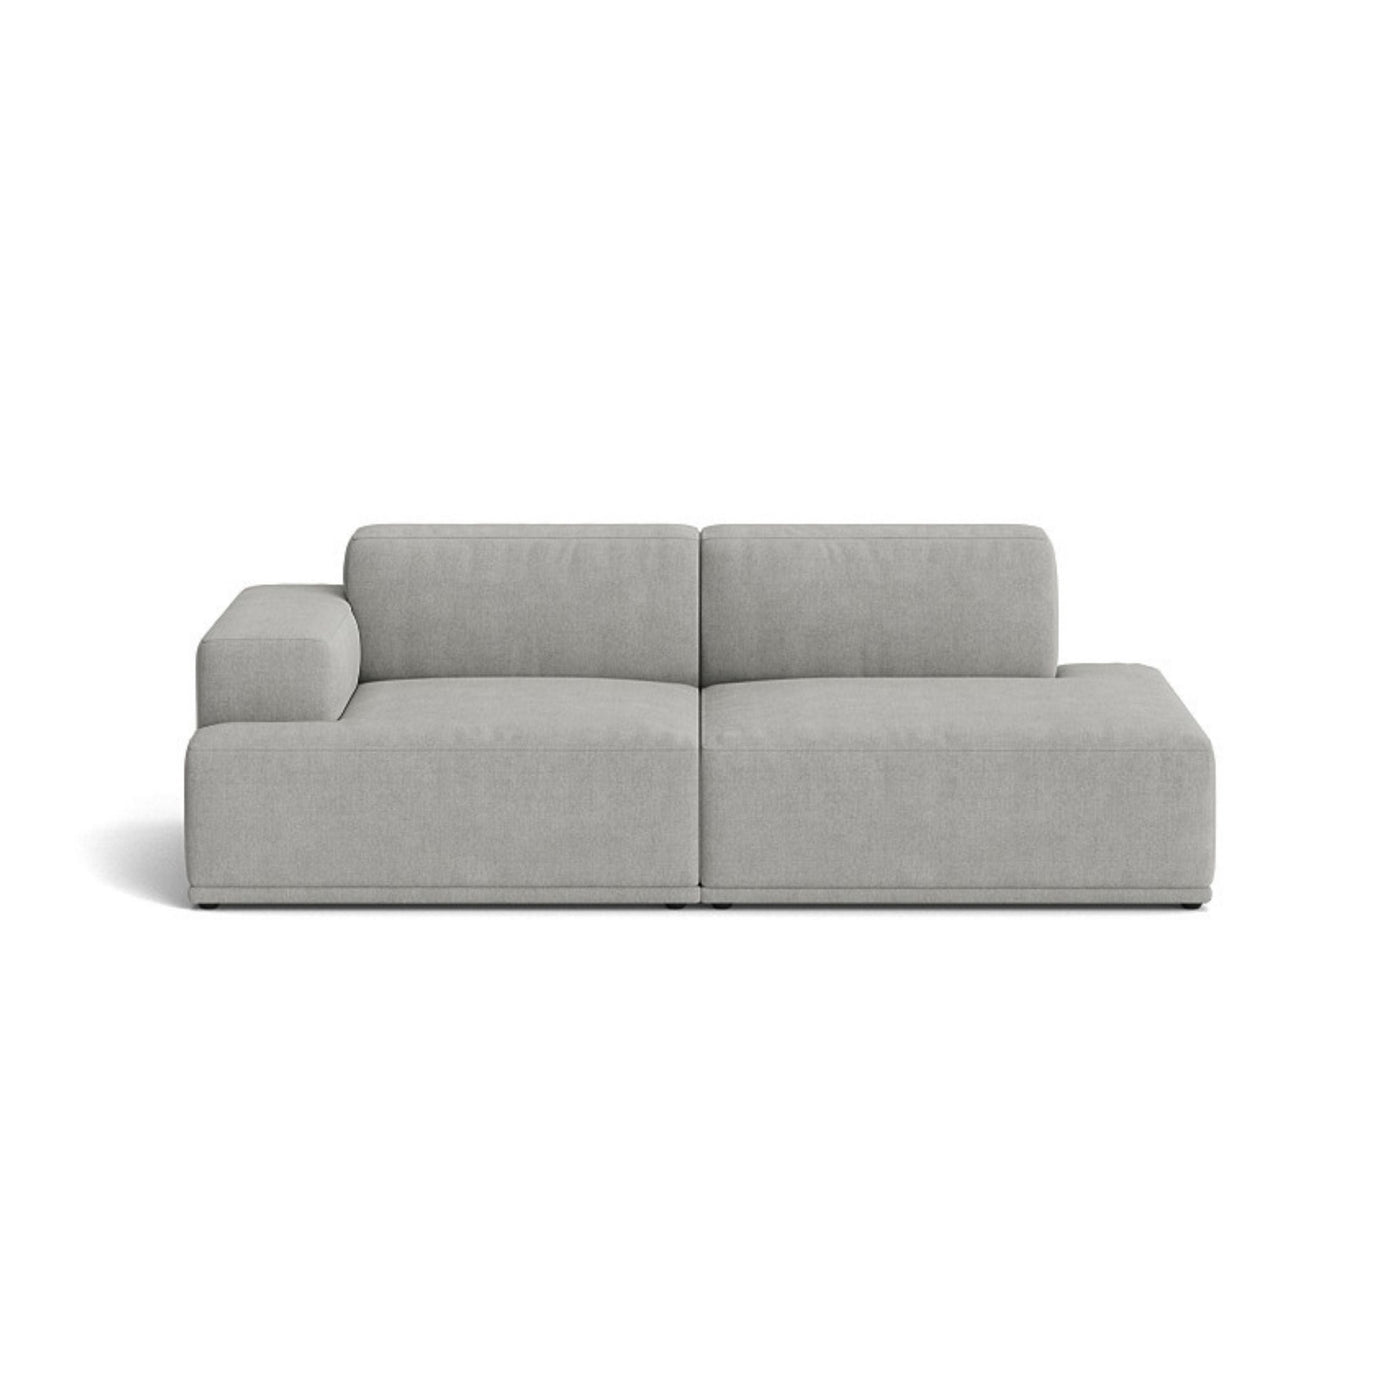 Muuto Connect Soft Modular 2 Seater Sofa, configuration 2. made-to-order from someday designs. #colour_remix-133